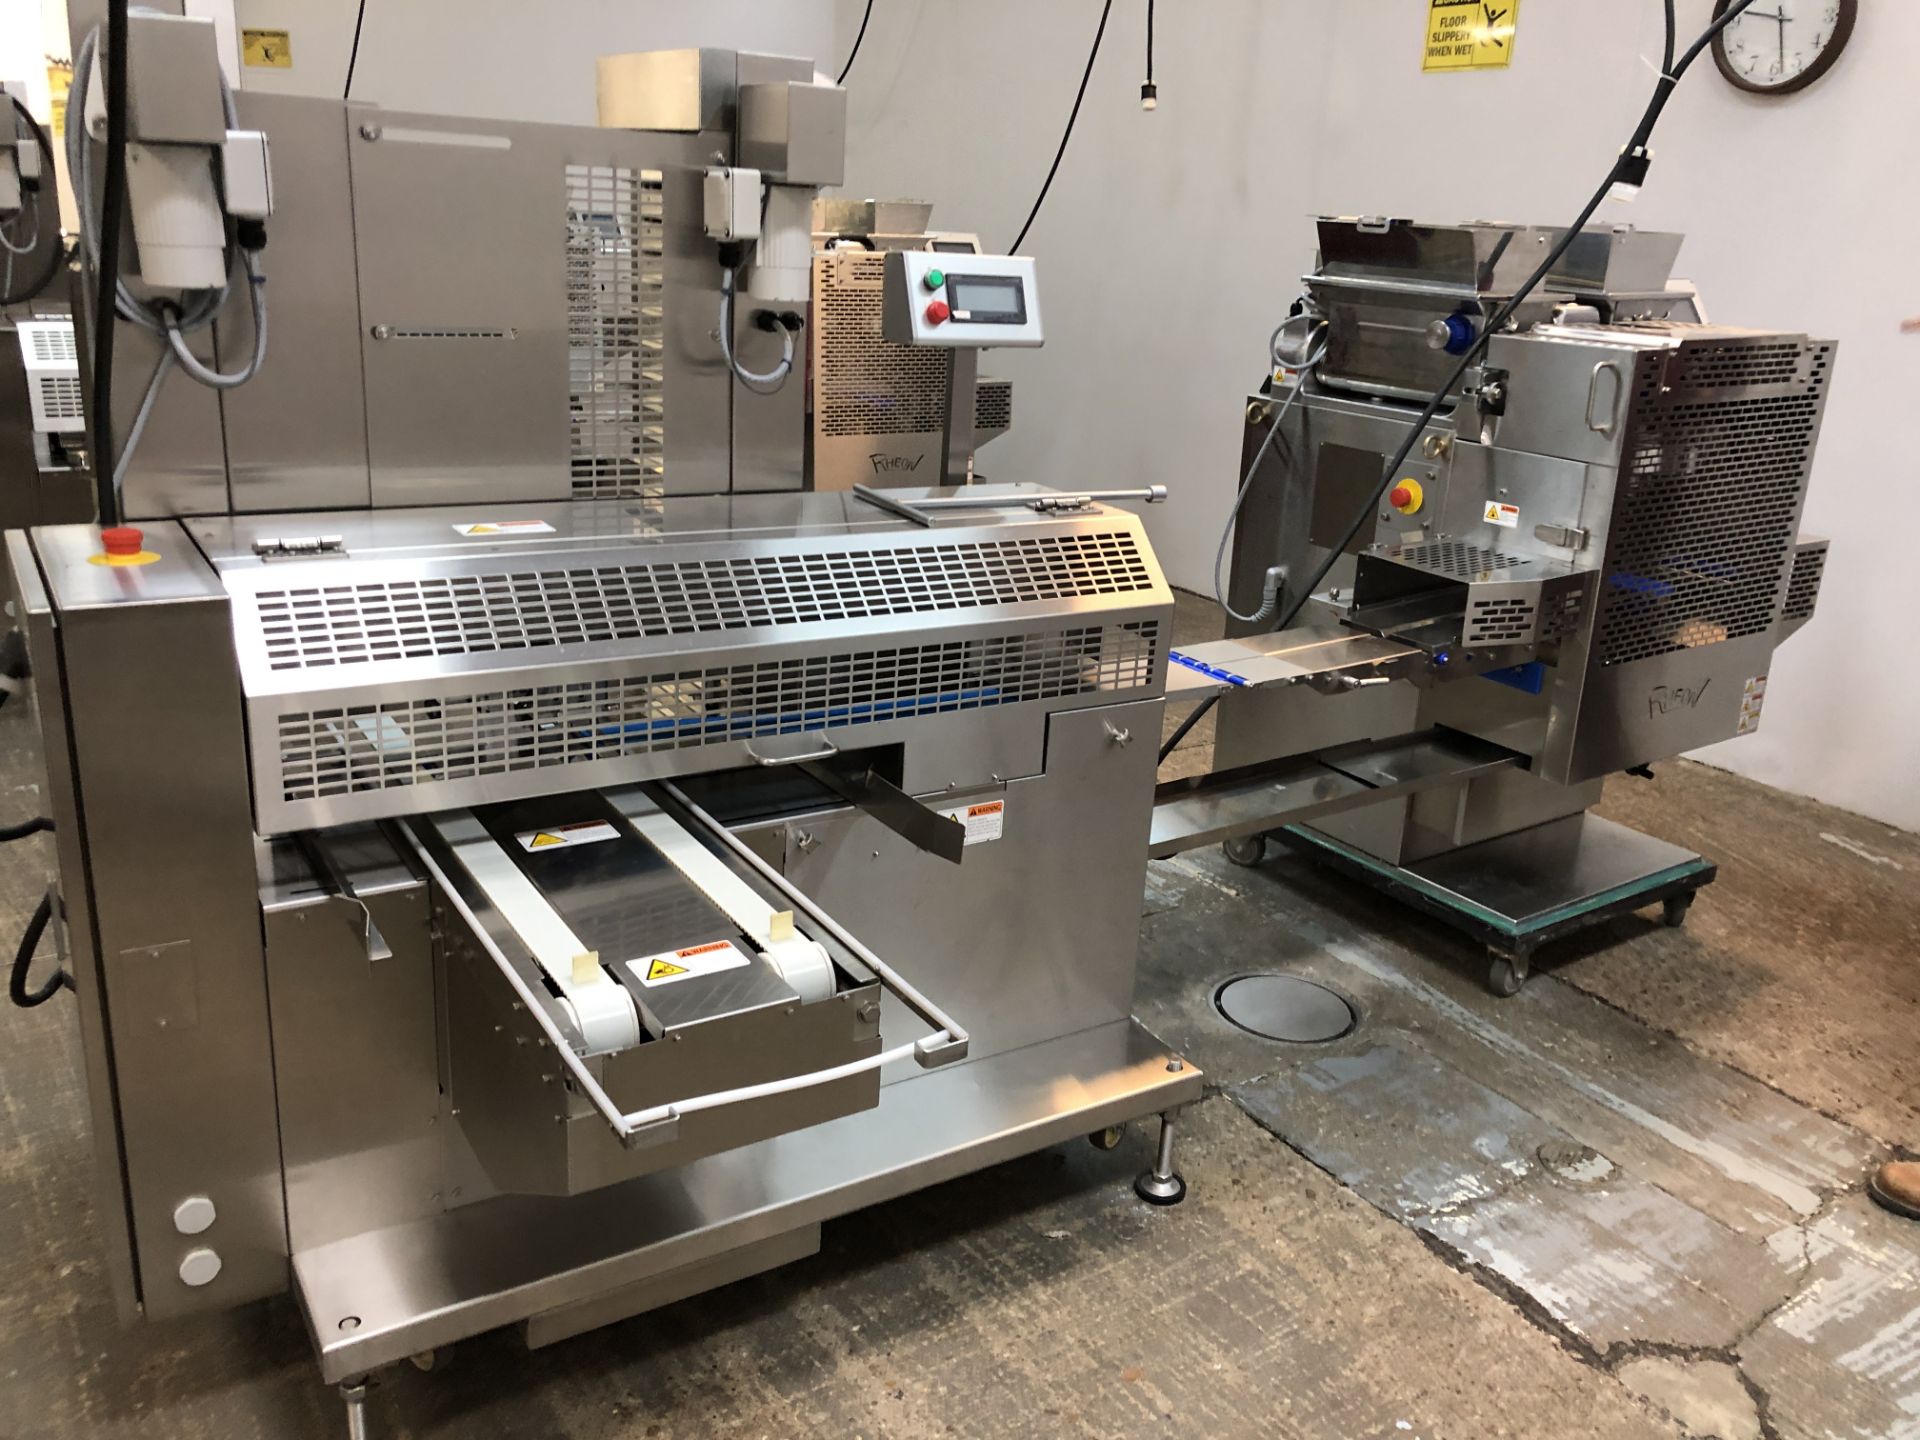 2019 Rheon Set Panner KP302; Tray Size: 660 mm, Up to 60 pcs/min, S/N: 00233 With Belting Rigging